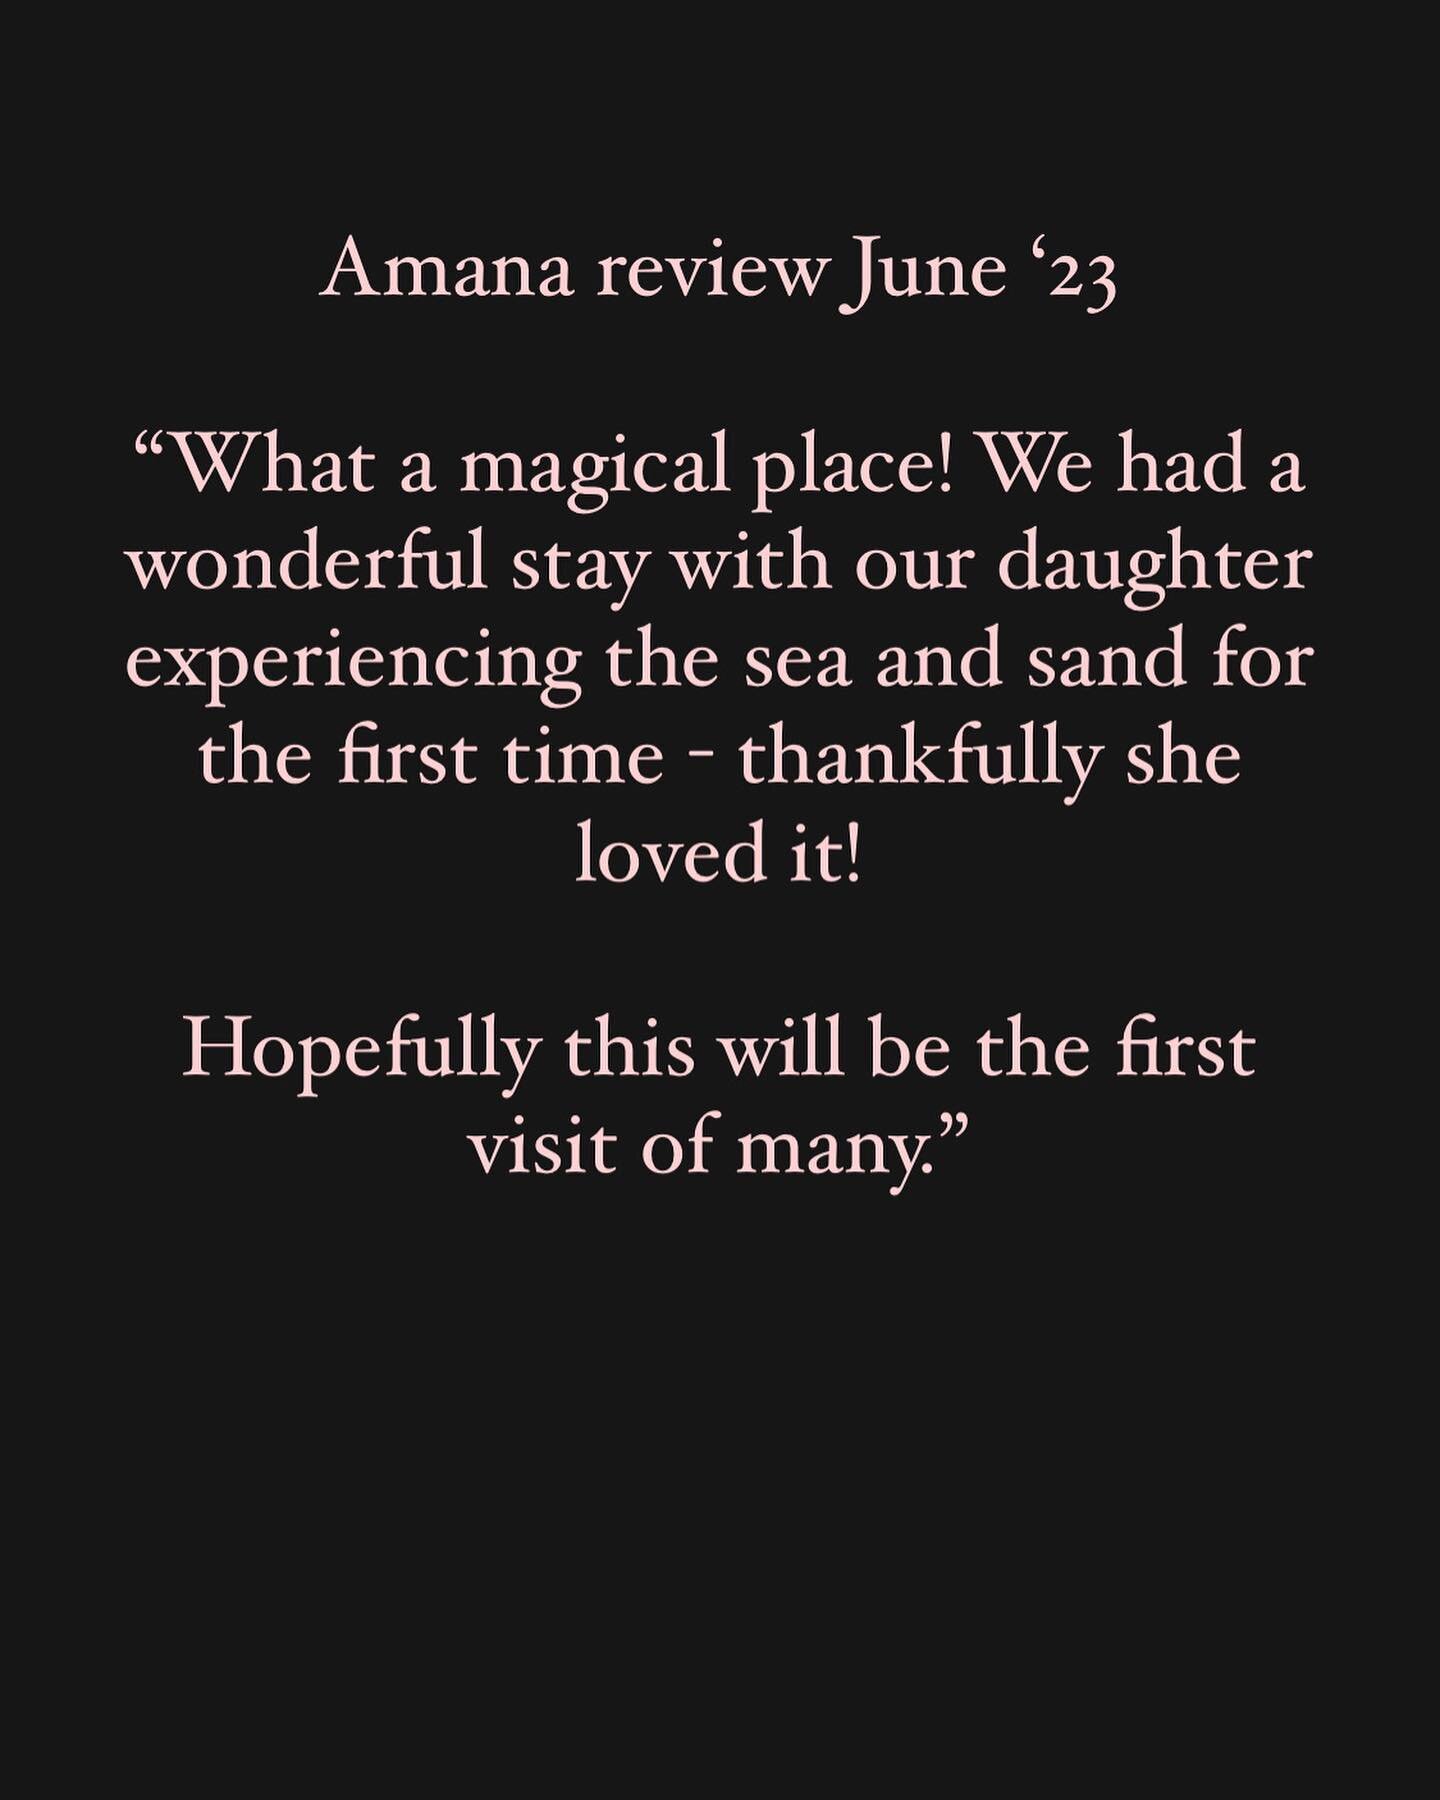 Some recent reviews from the balmy days of June ☀️🏖️